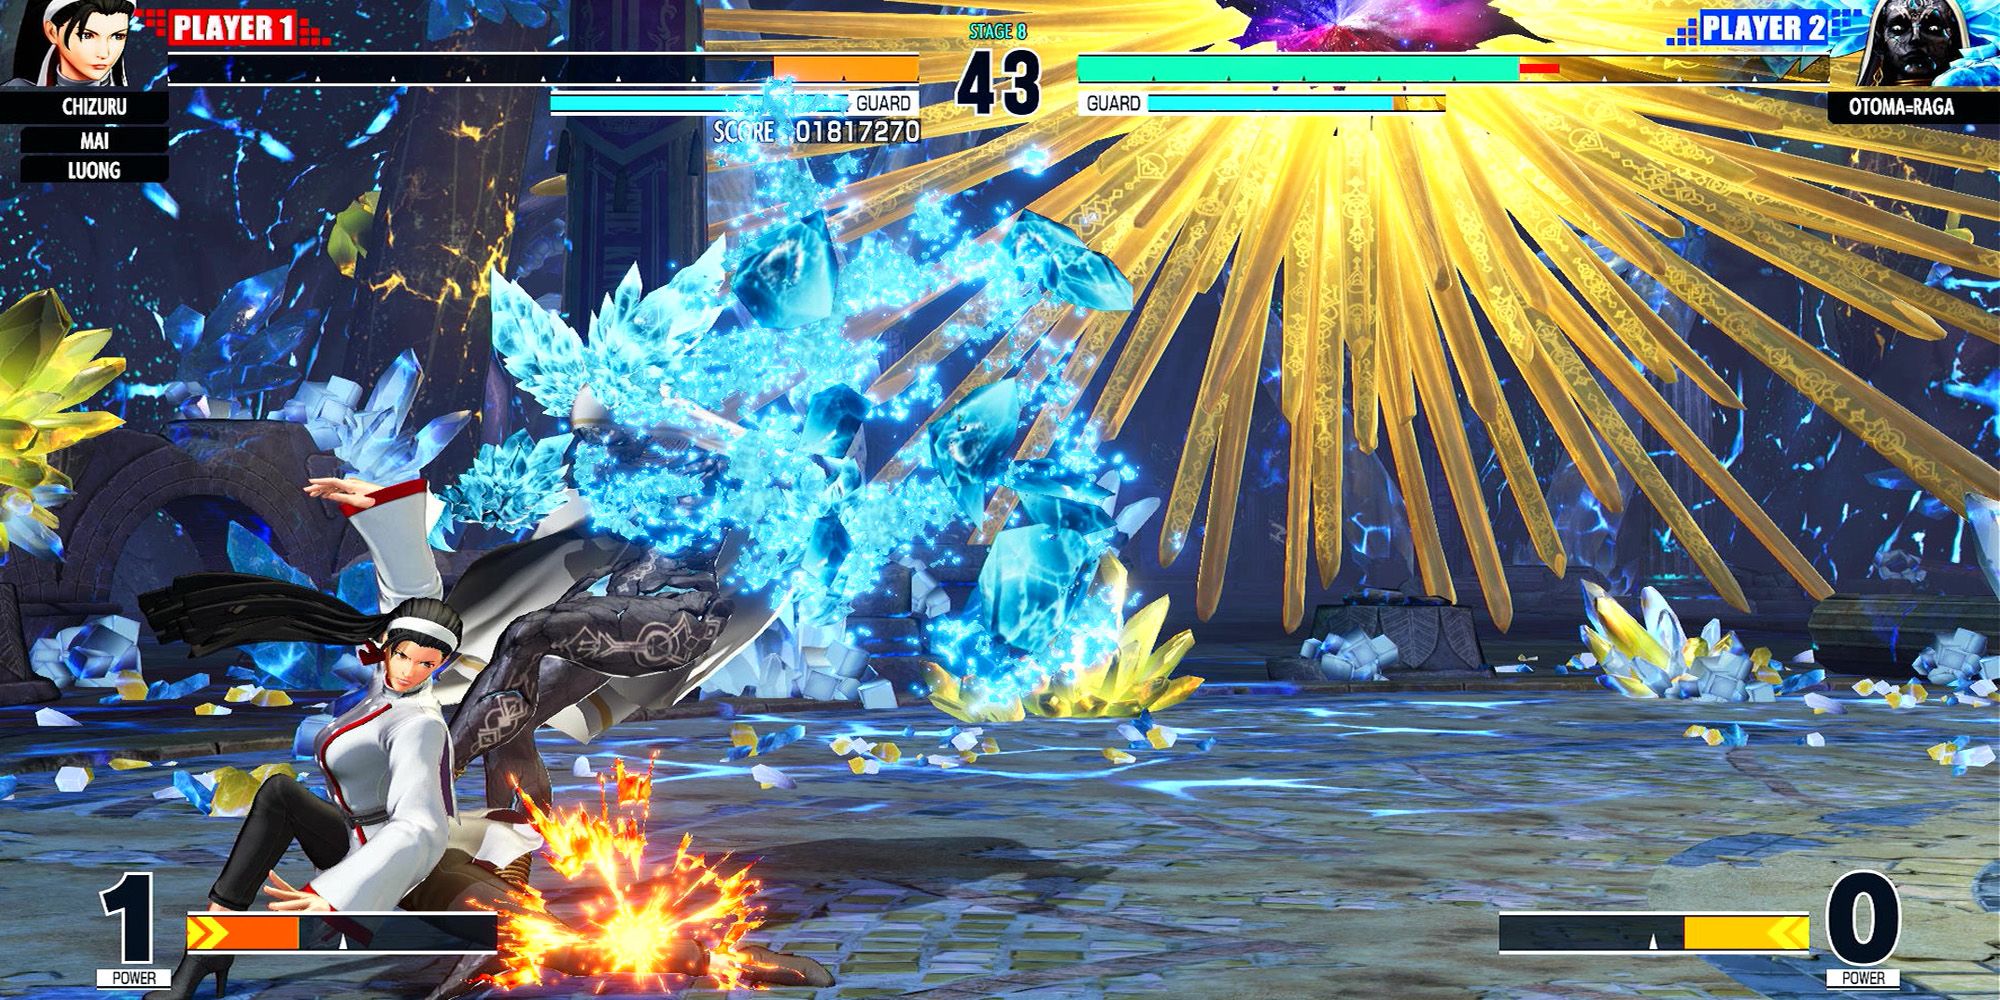 Chizuru sweeps Otoma=Raga with a low heavy kick in the Crystallization Arena. The King Of Fighters 15.